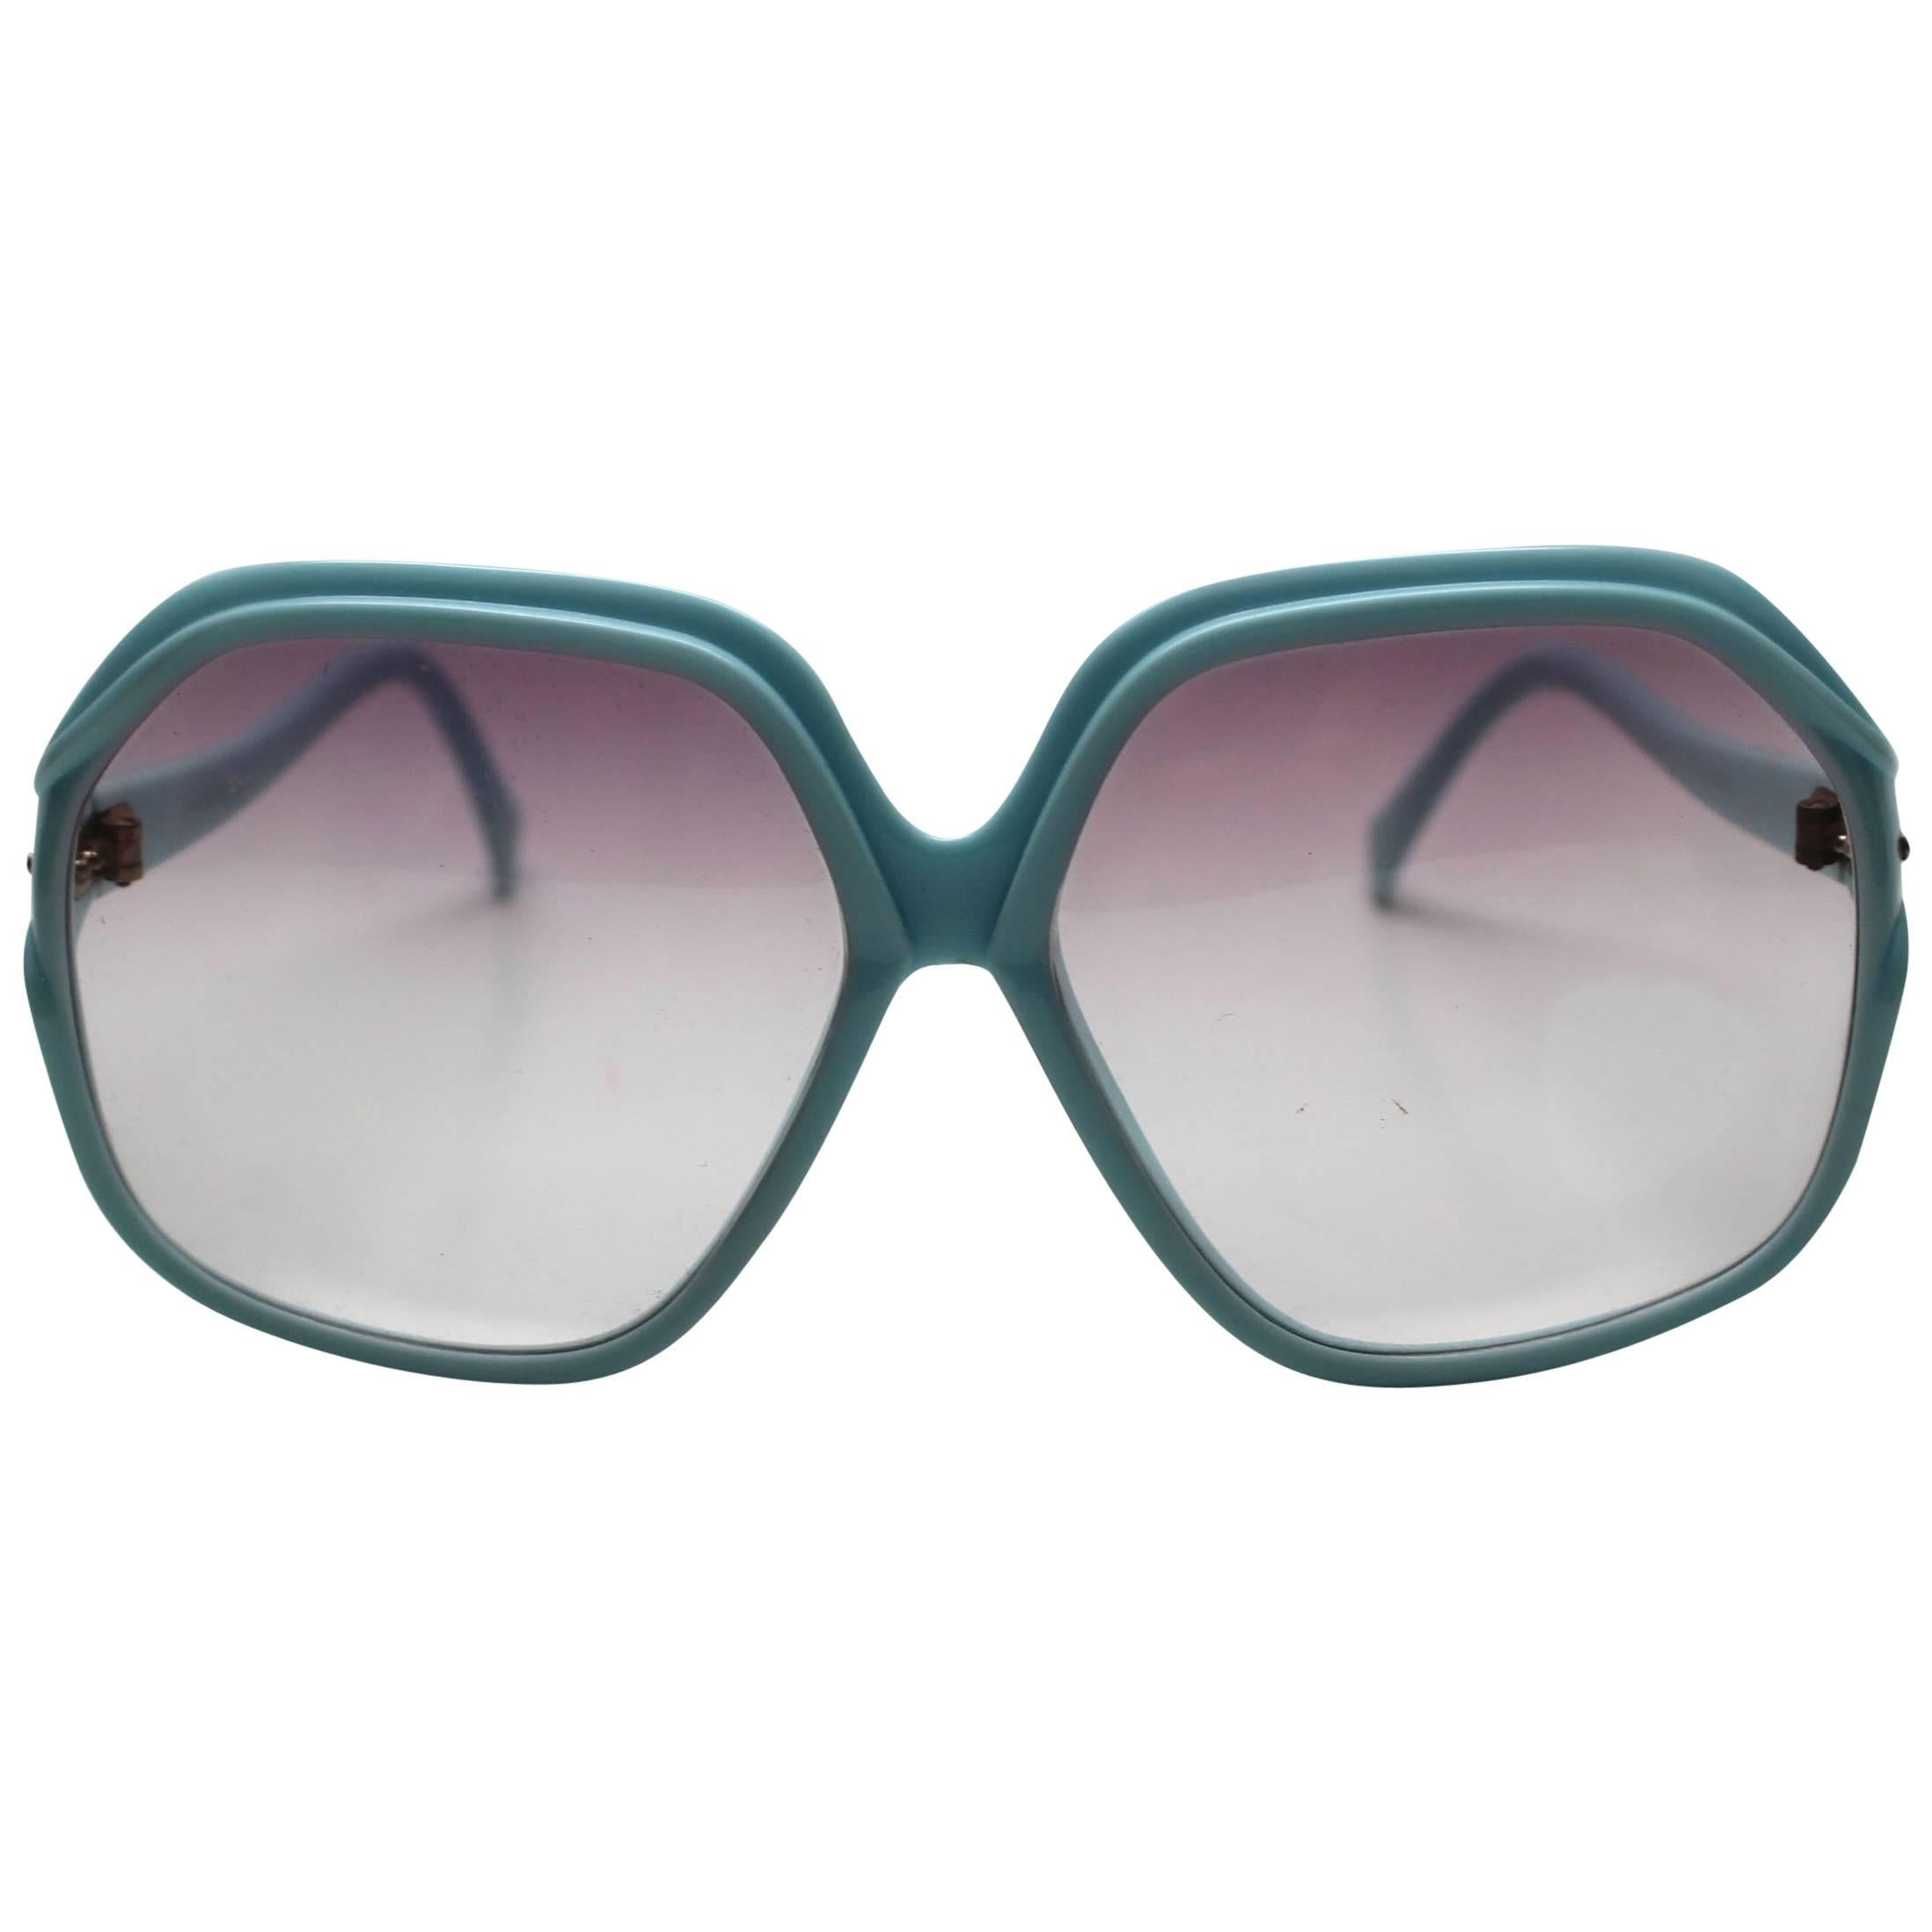 1970s Deadstock Light Blue Sunglasses Made in Italy For Sale